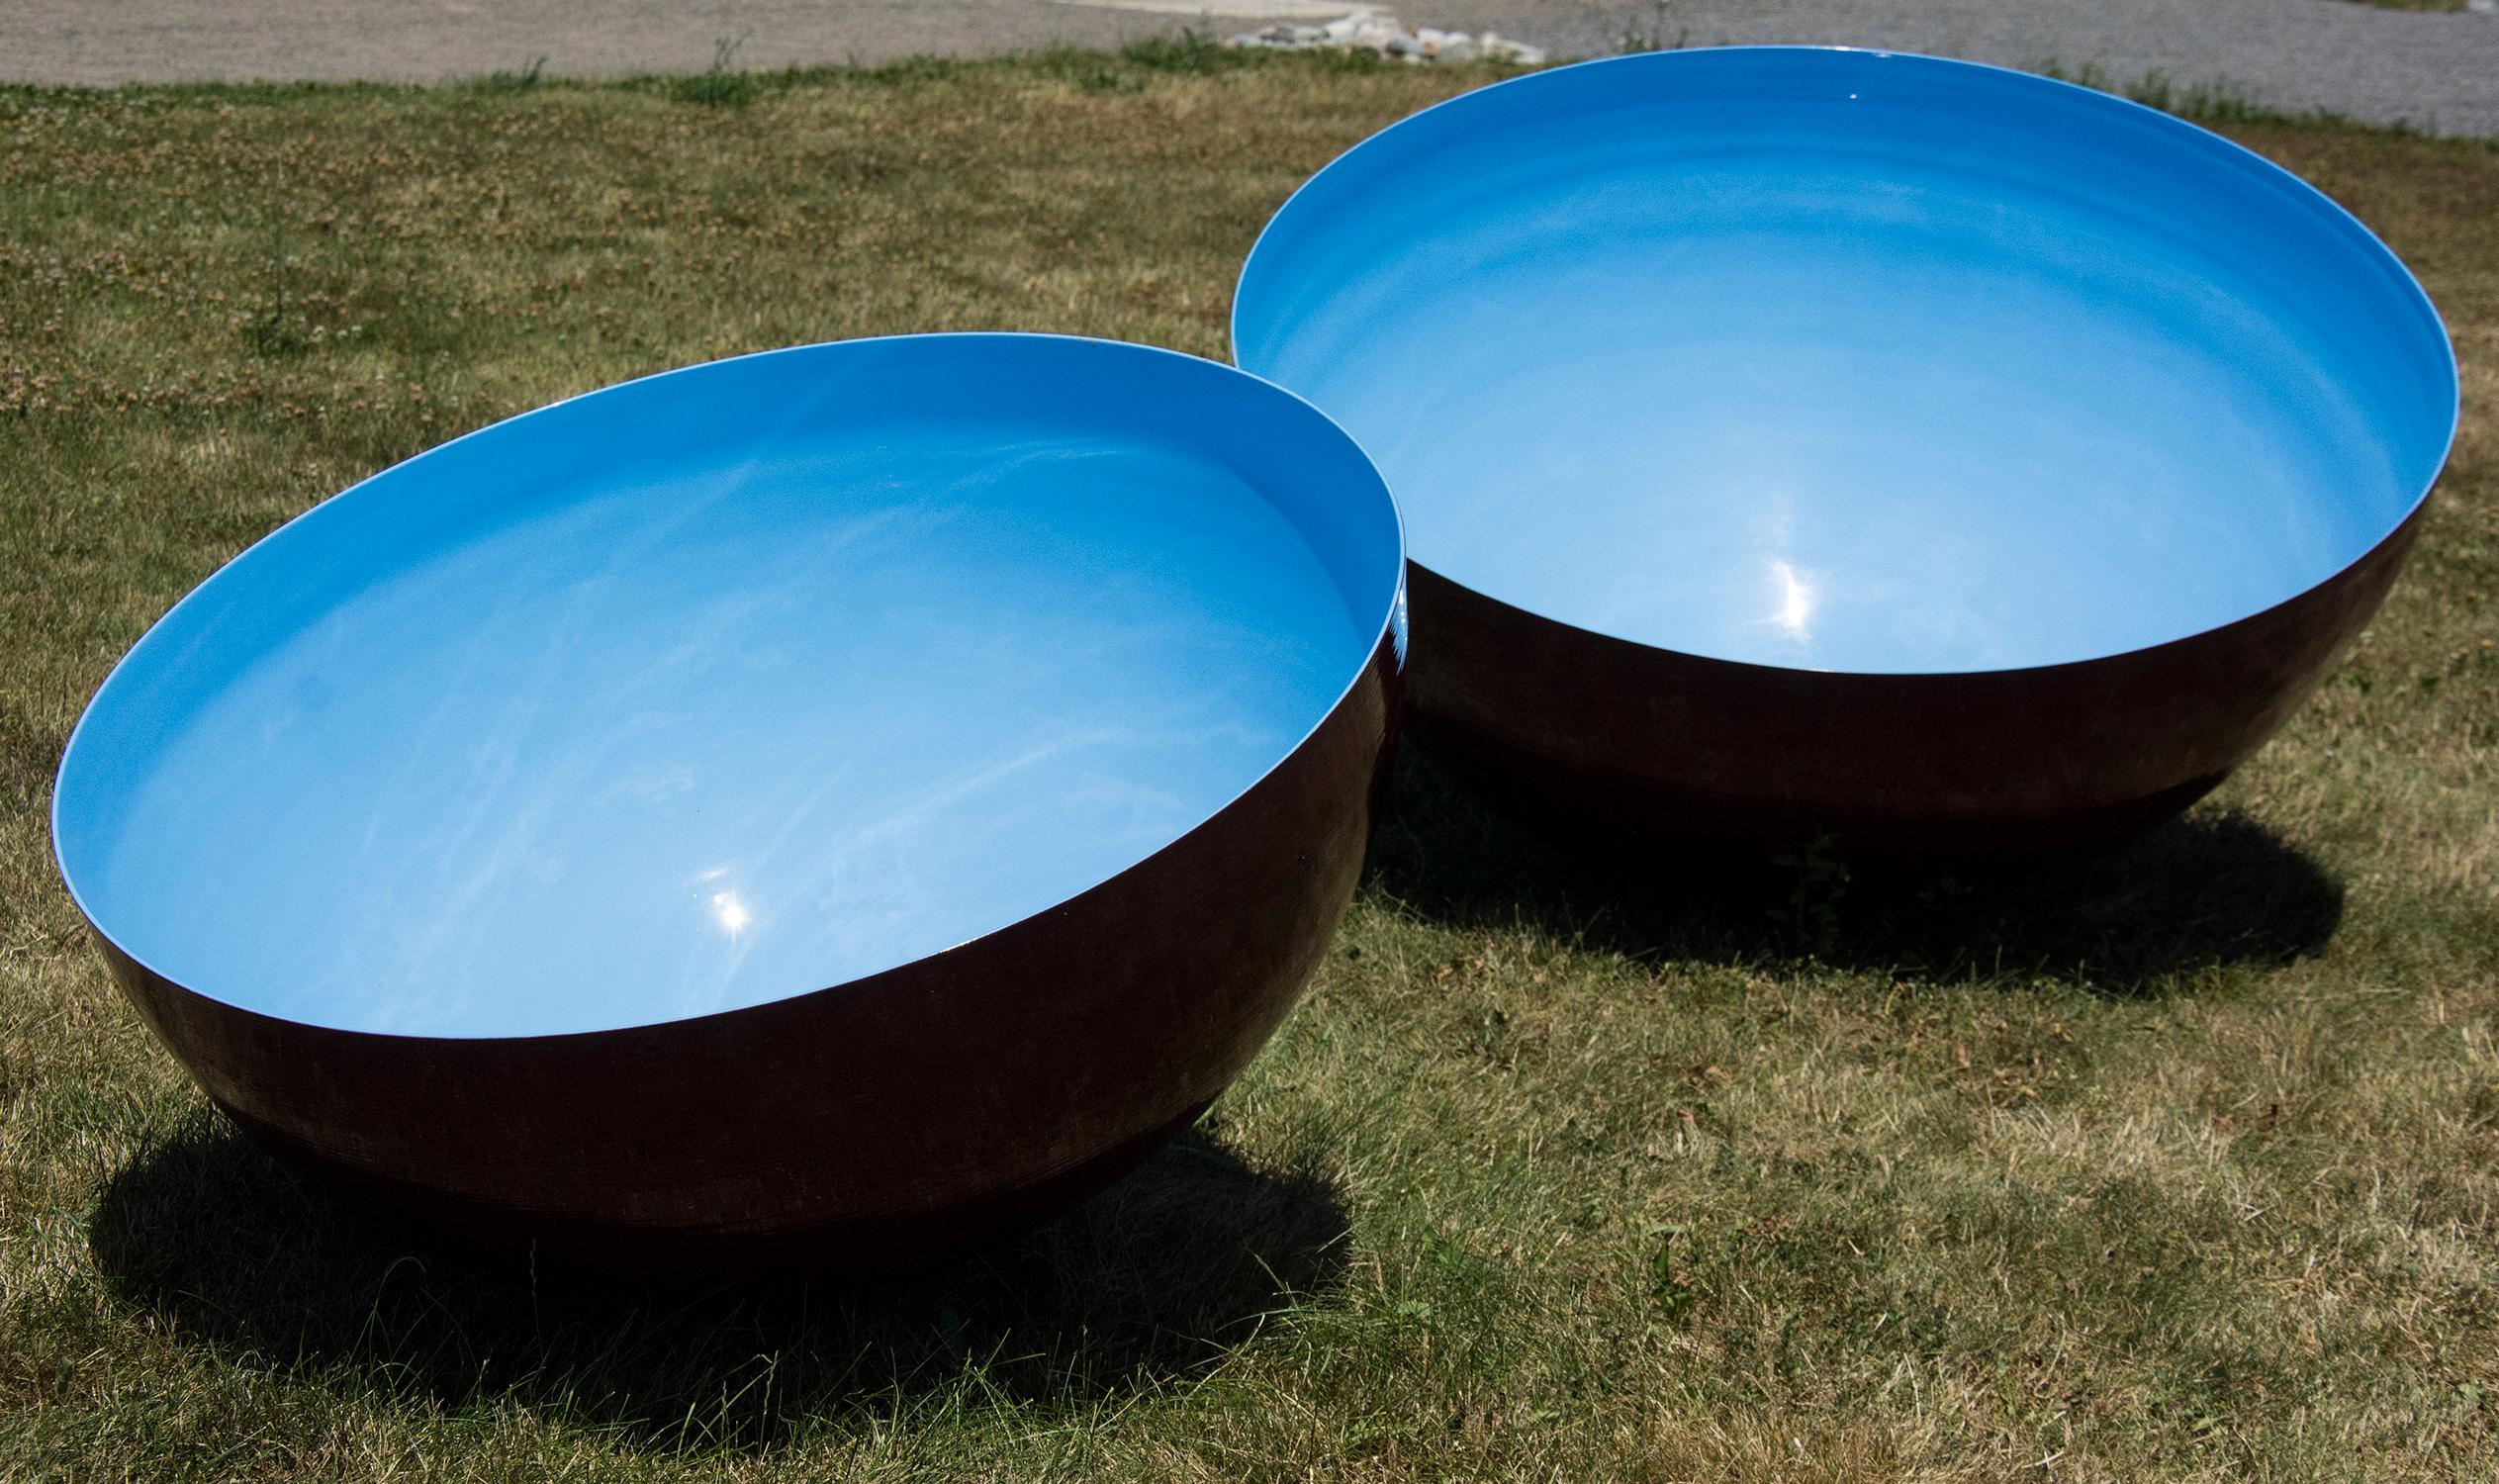 Singing Bowl Cerulean Sky Medium - outdoor stainless steel sculpture in blue - Contemporary Sculpture by Marlene Hilton Moore